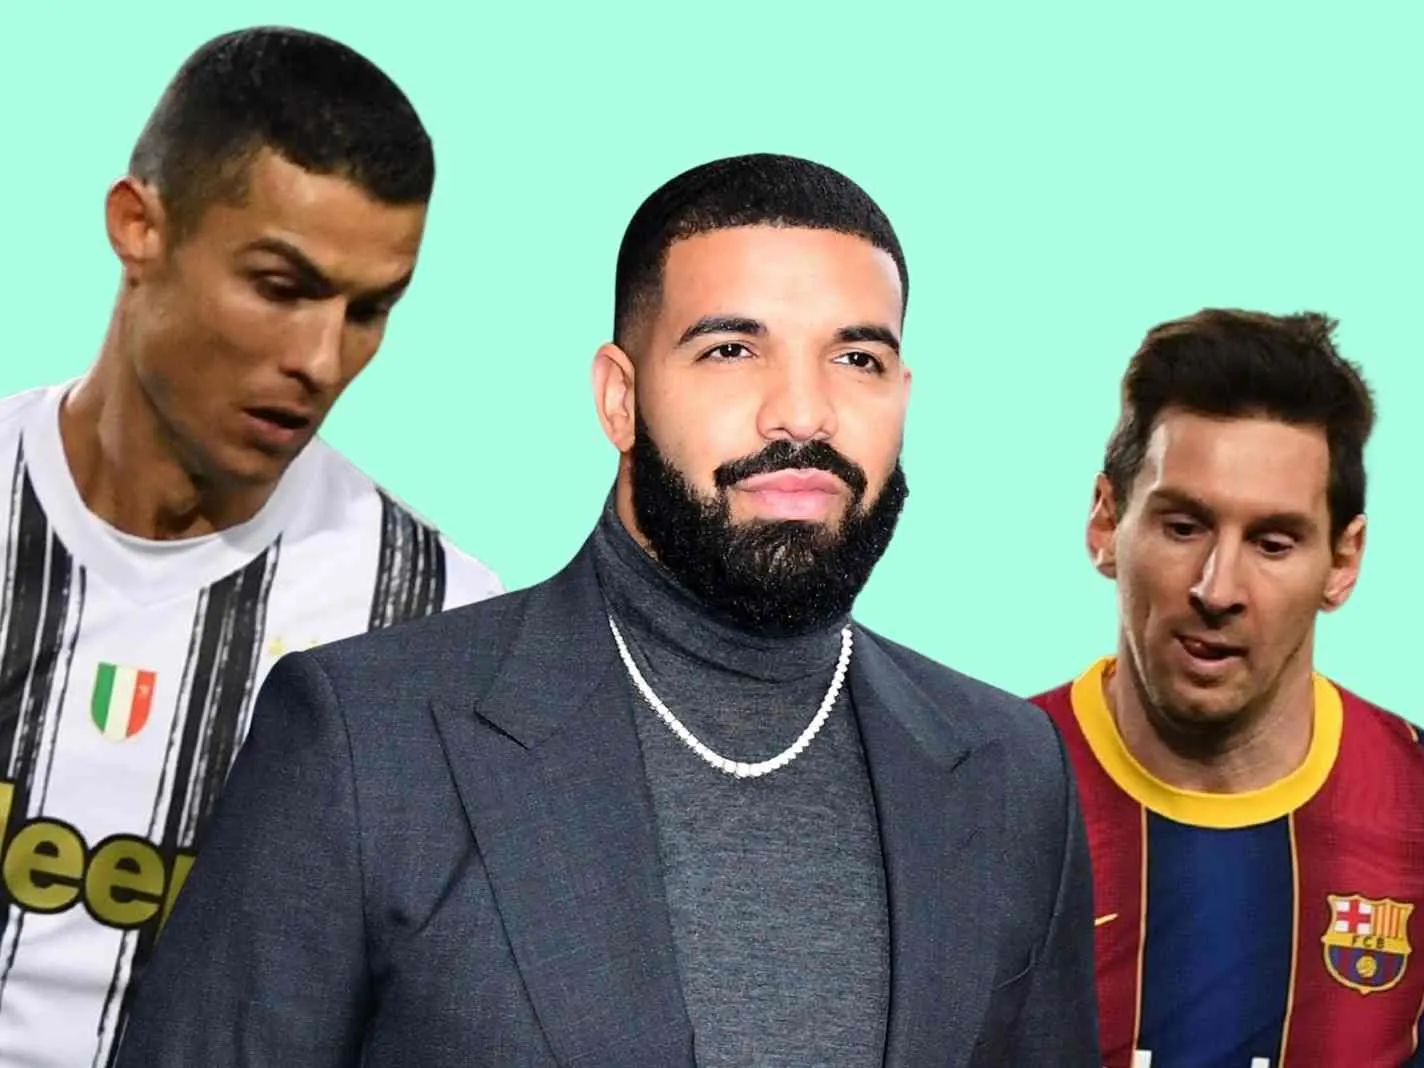 Drake name drops Messi and Ronaldo in the same track in new rap album with Future